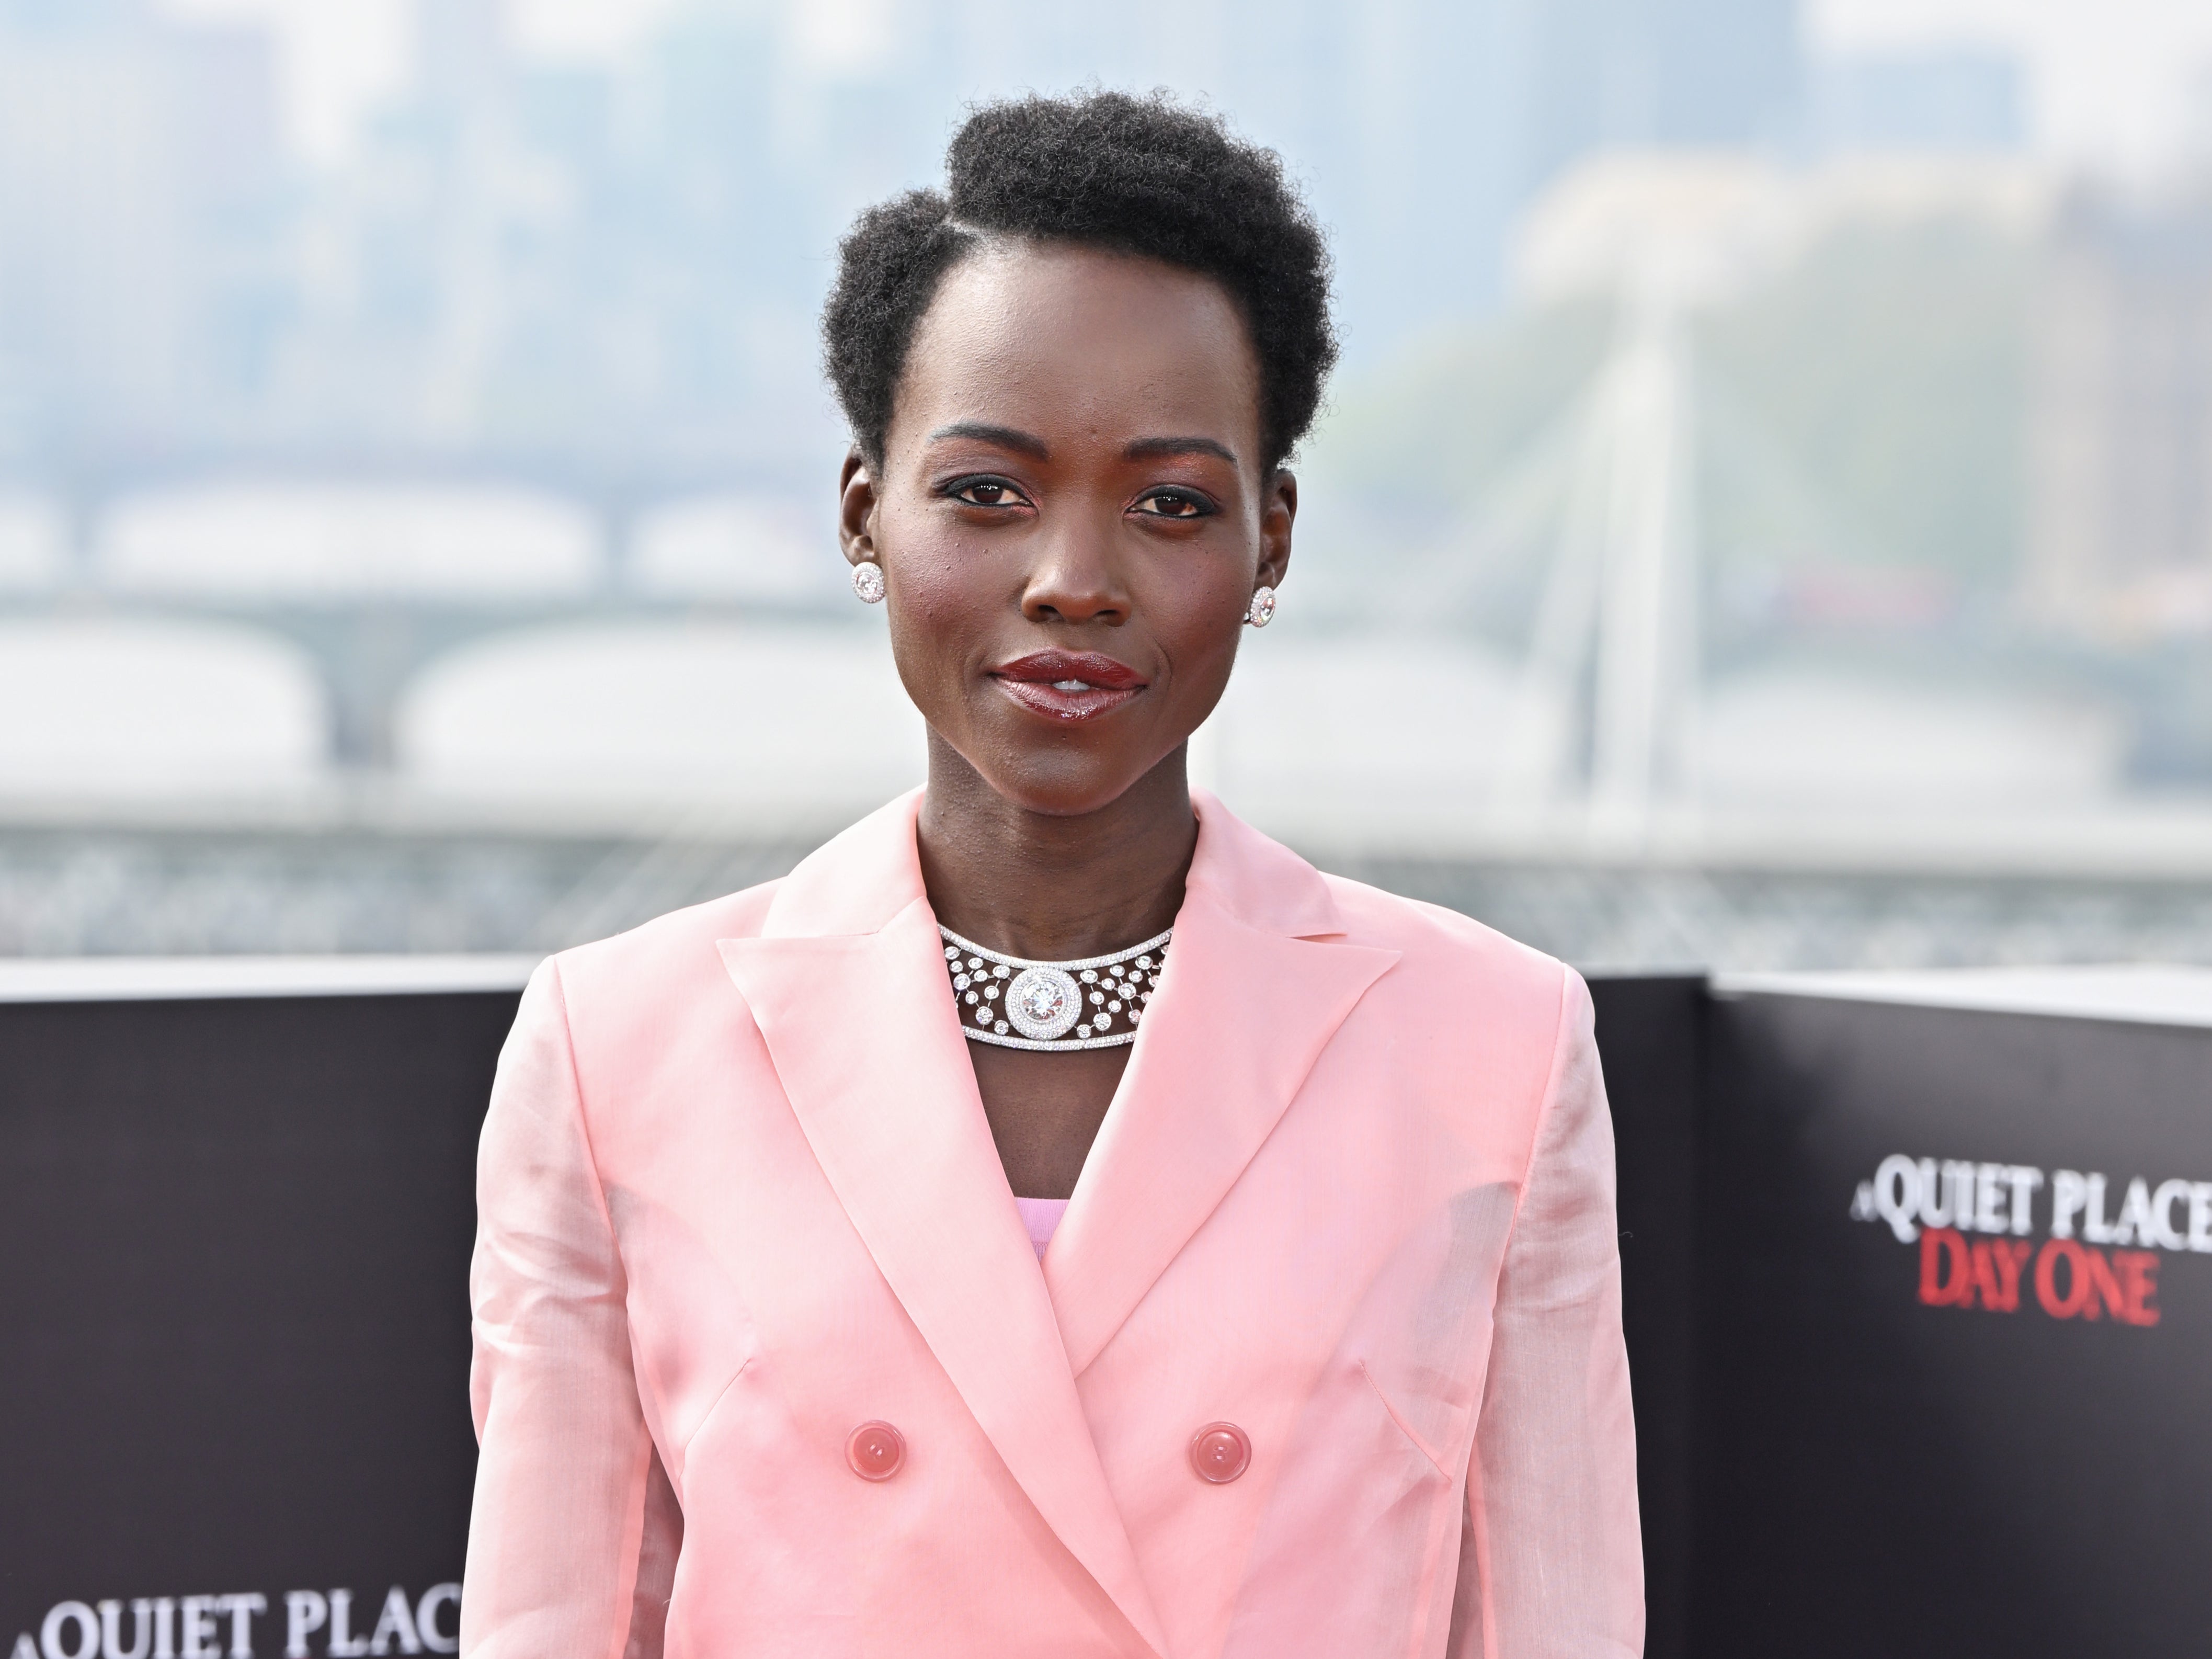 Lupita Nyong'o attends a photocall in London in support of 'A Quiet Place: Day One'